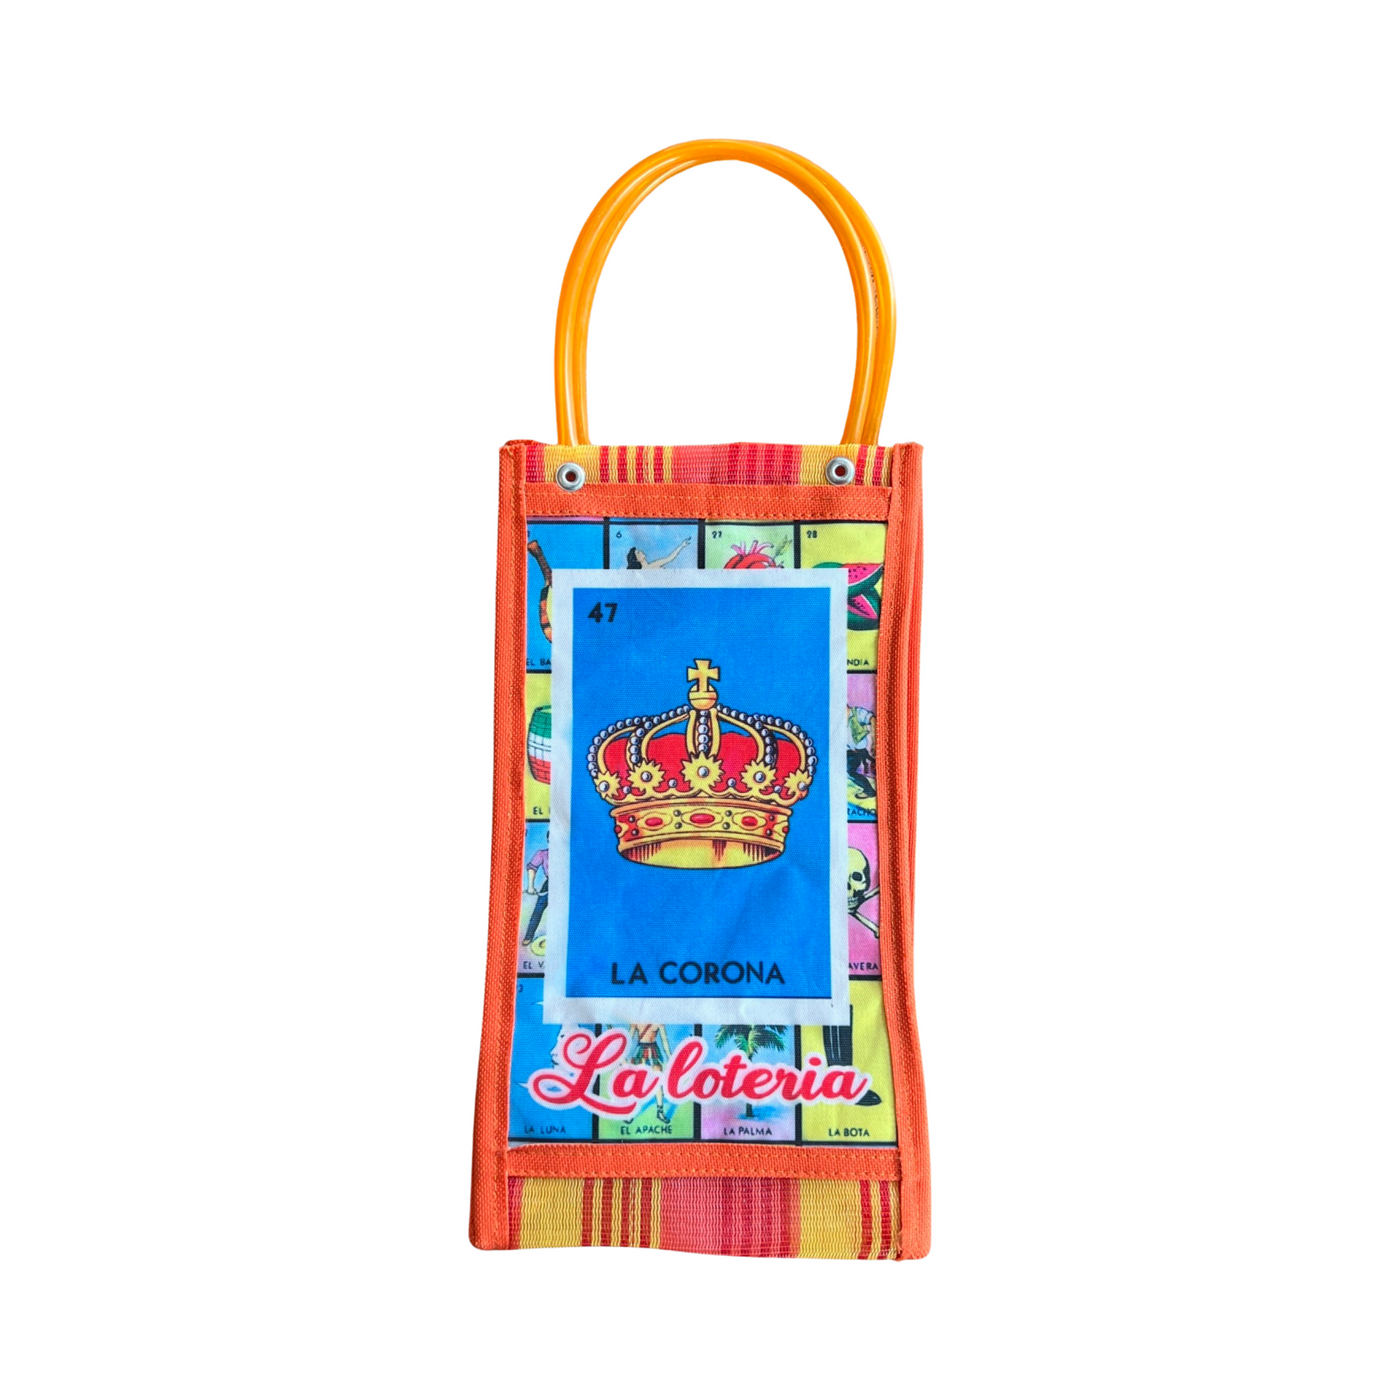 Orange Mexican mesh market bag with an image of the La Corona loteria card.